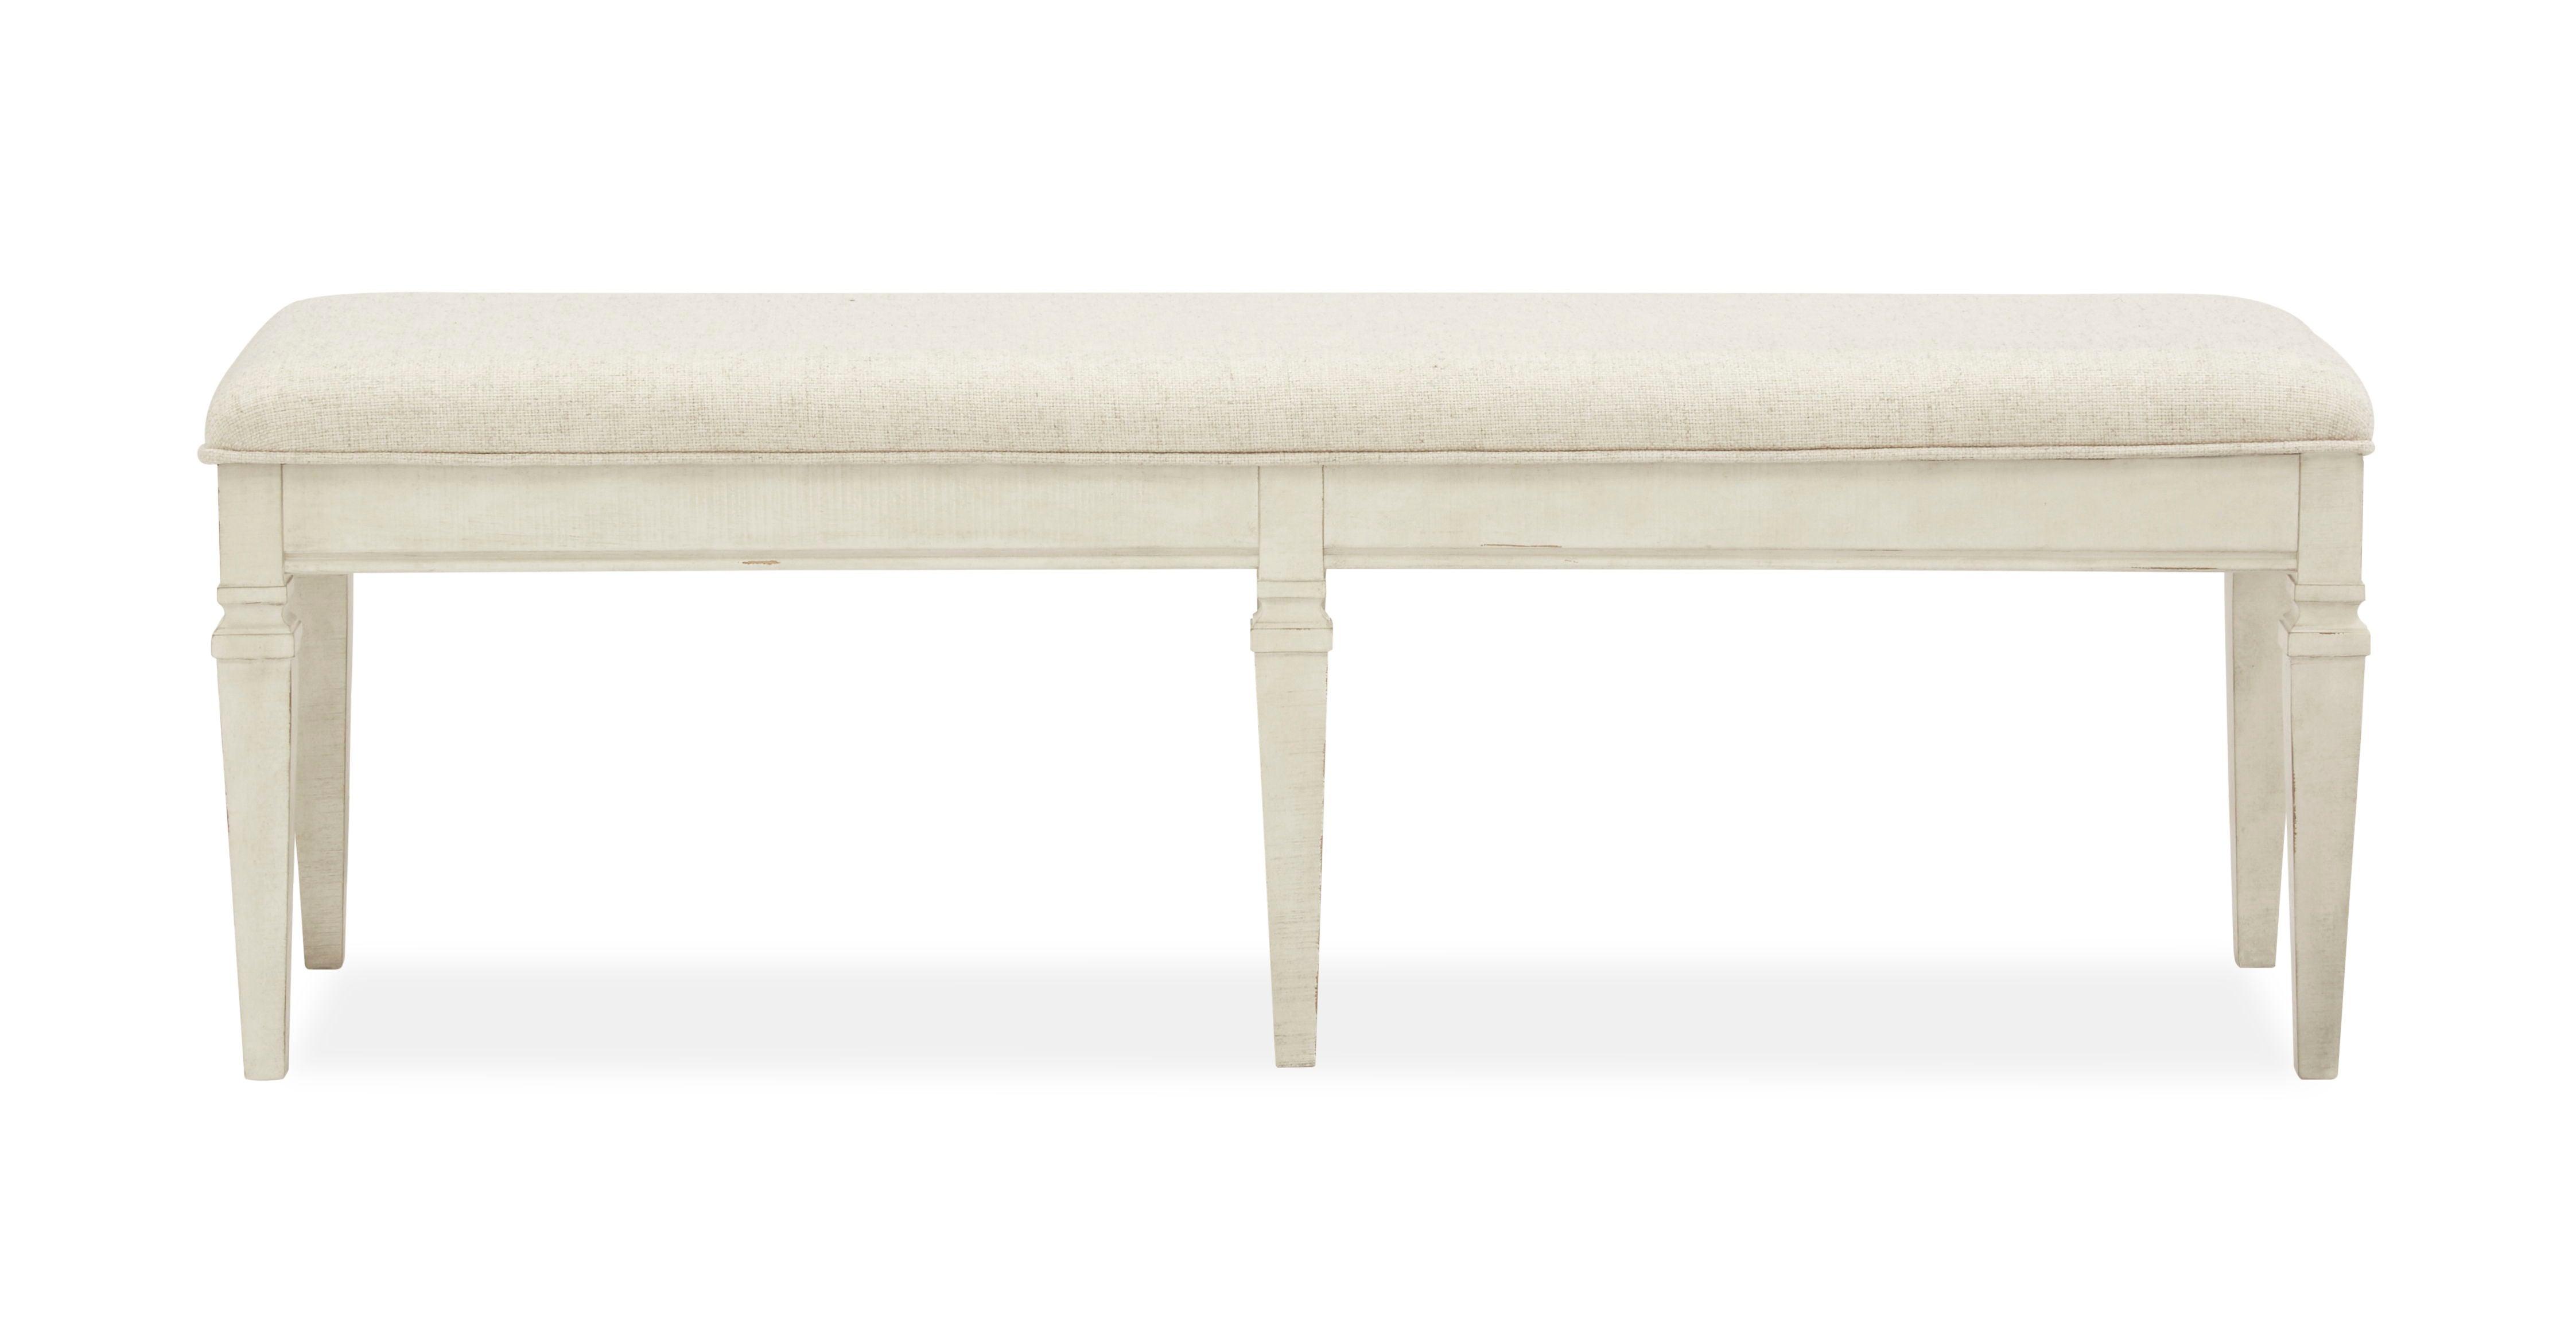 Magnussen Furniture - Newport - Bench With Upholstered Seat - Alabaster - 5th Avenue Furniture